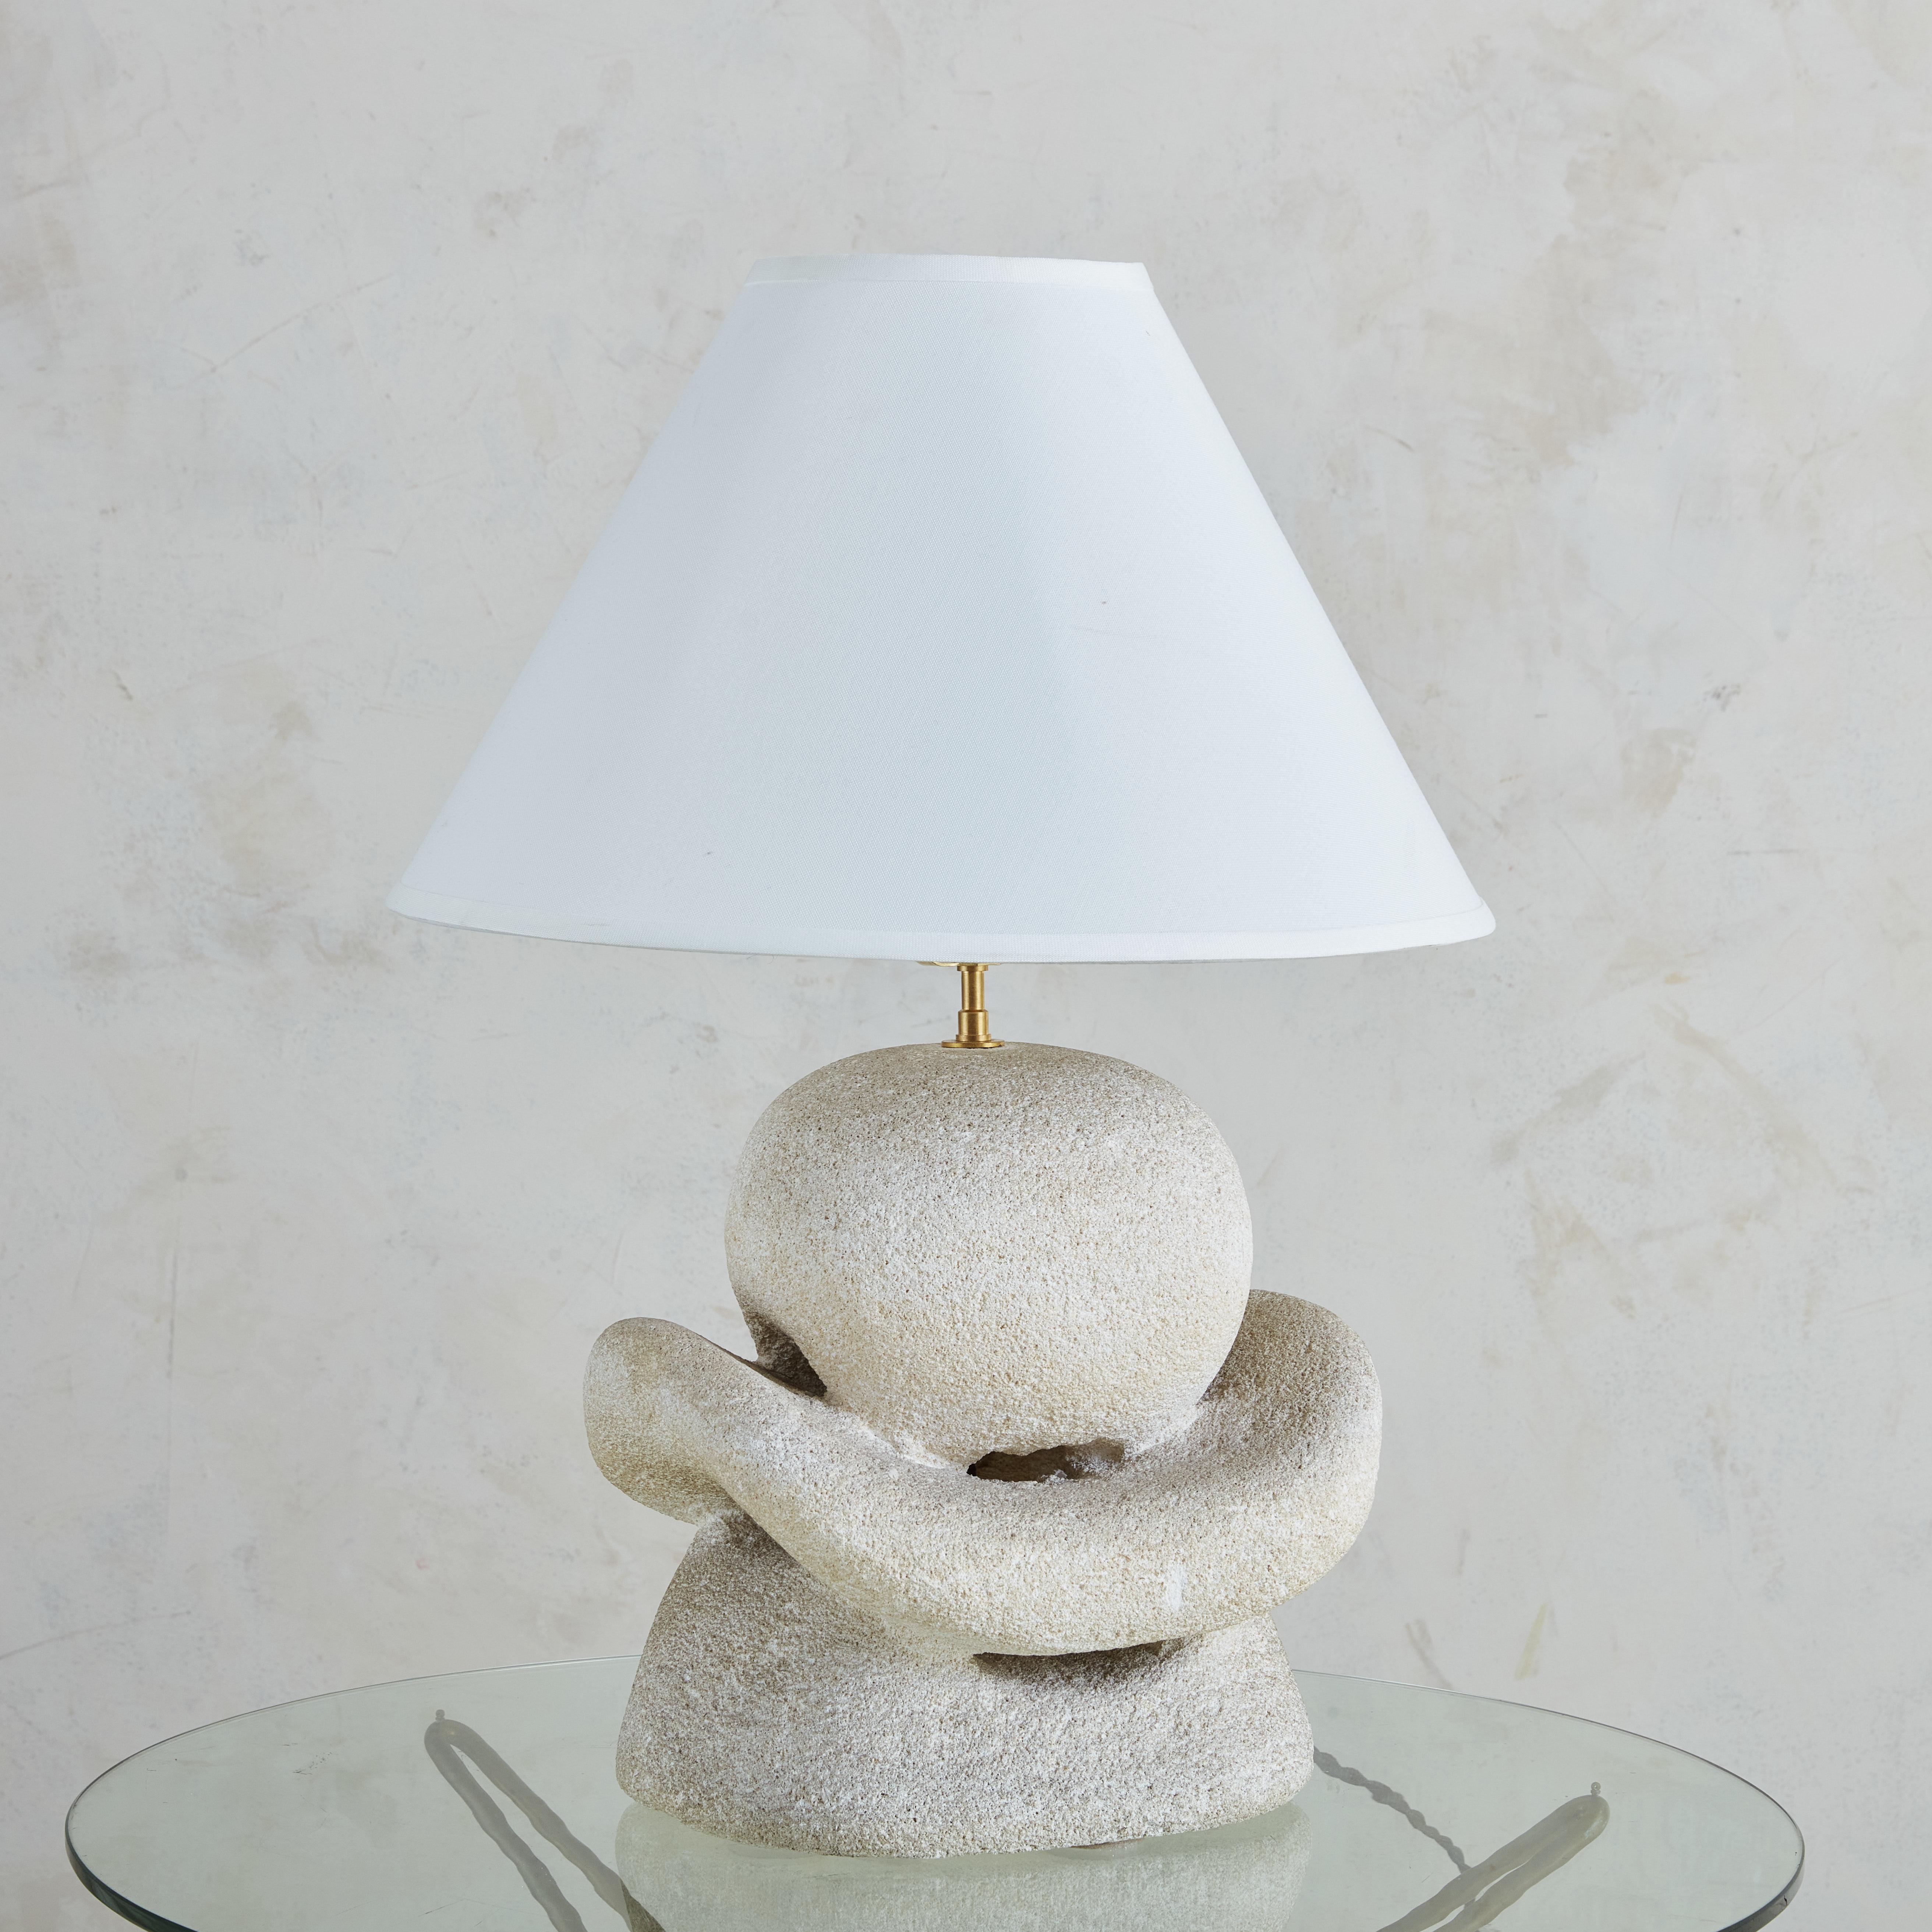 Hand-carved solid limestone table lamp by Albert Tormos, France, circa 1970s. Beautifully carved this 3d abstract and organic sculpture showcases sinous lines and a hammered finish.

Albert Tormos was a French artist who developed lamps which he